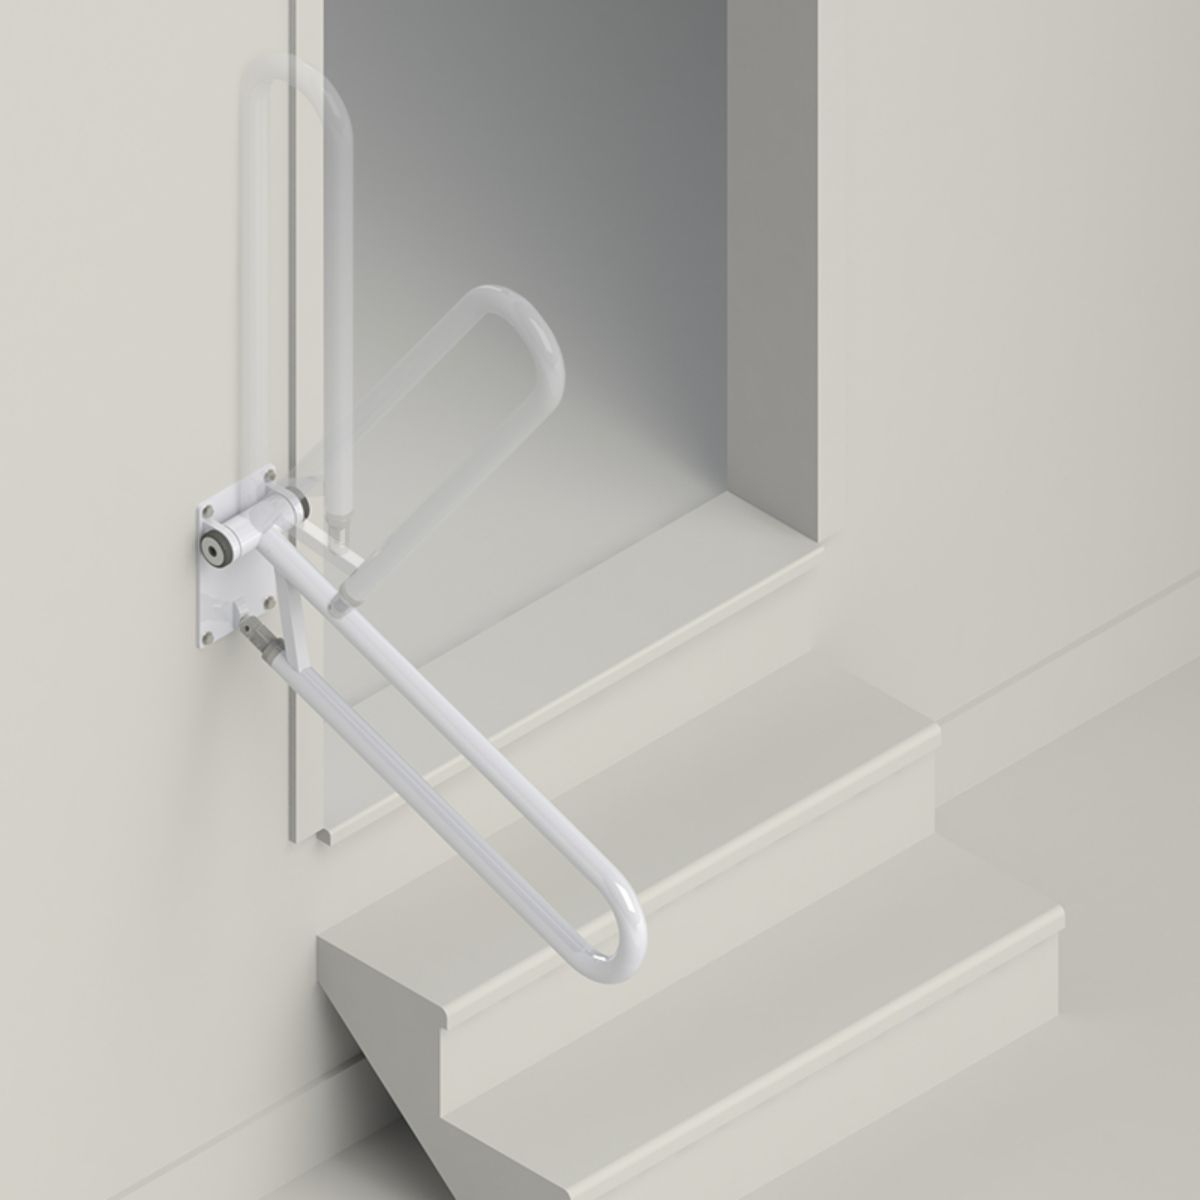 Handrails or Stairlifts